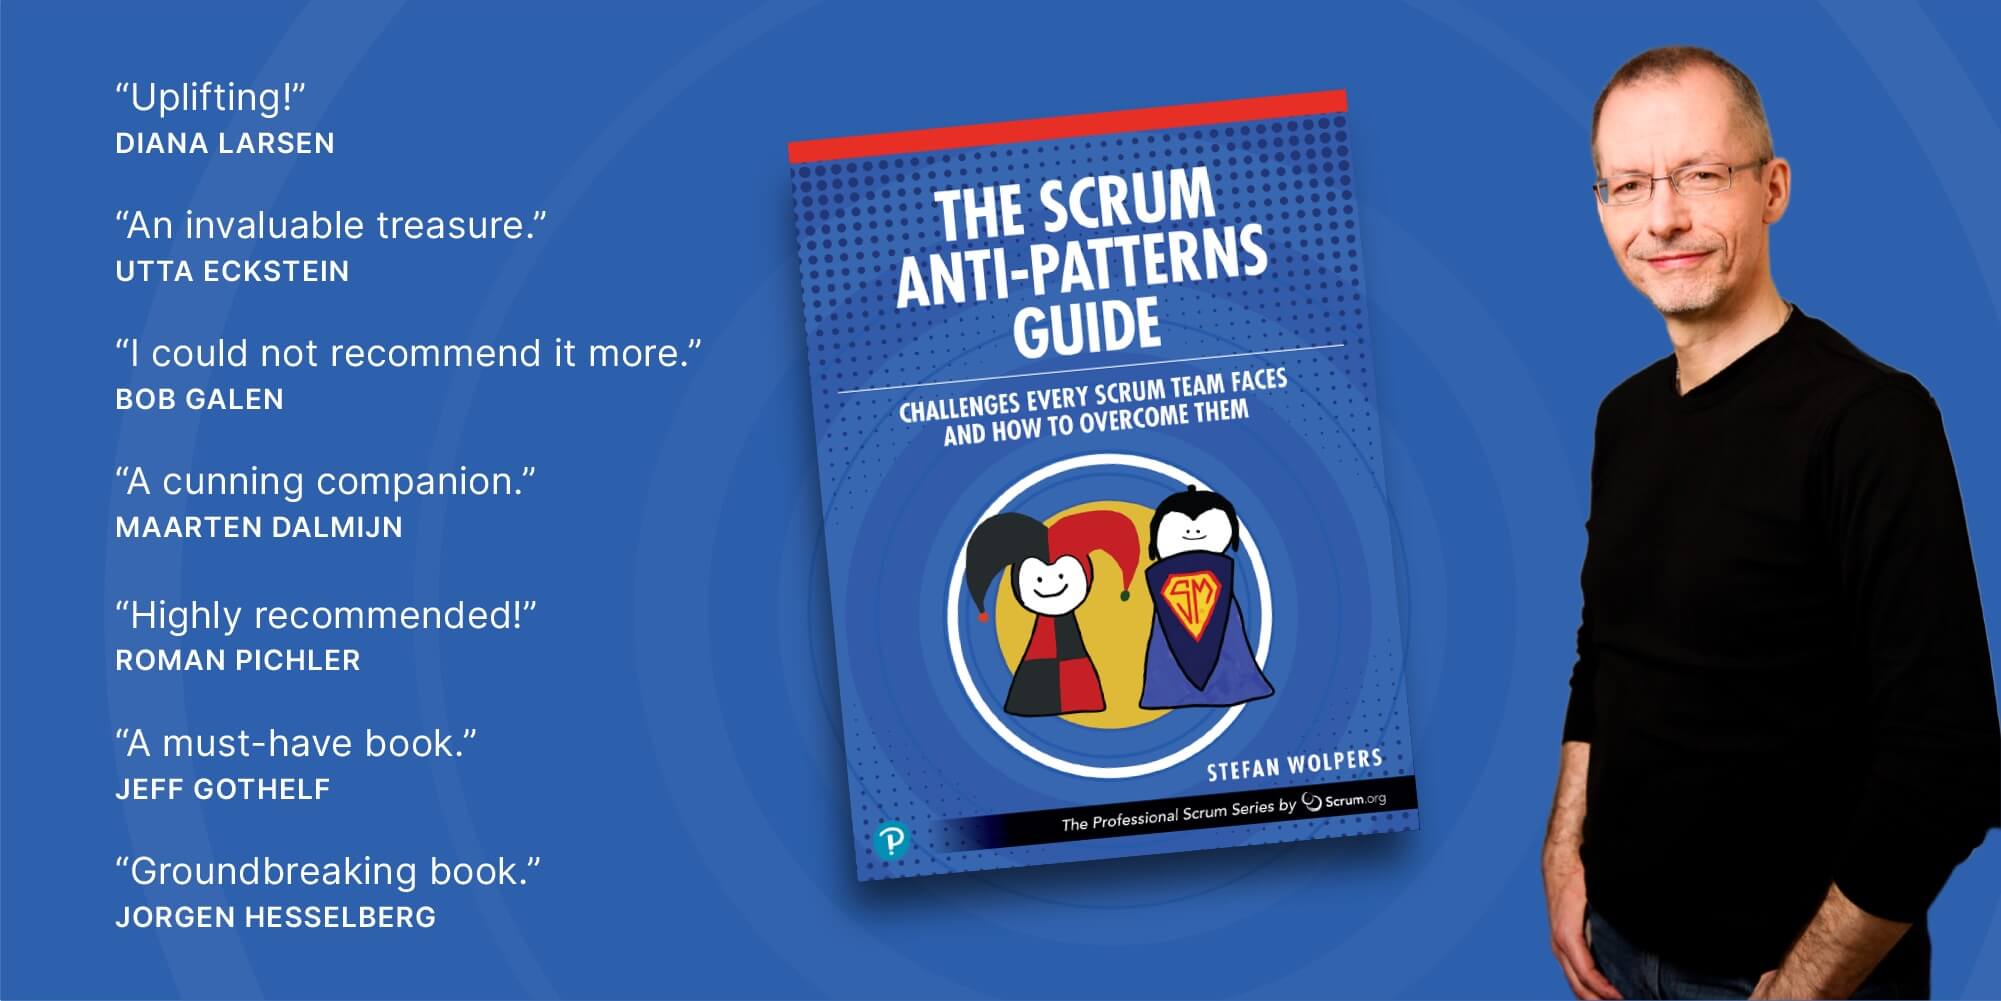 Professional Scrum Training with PST Stefan Wolpers, author of the Scrum Anti-Patterns Guide from Pearson’s Professional Scrum Series.